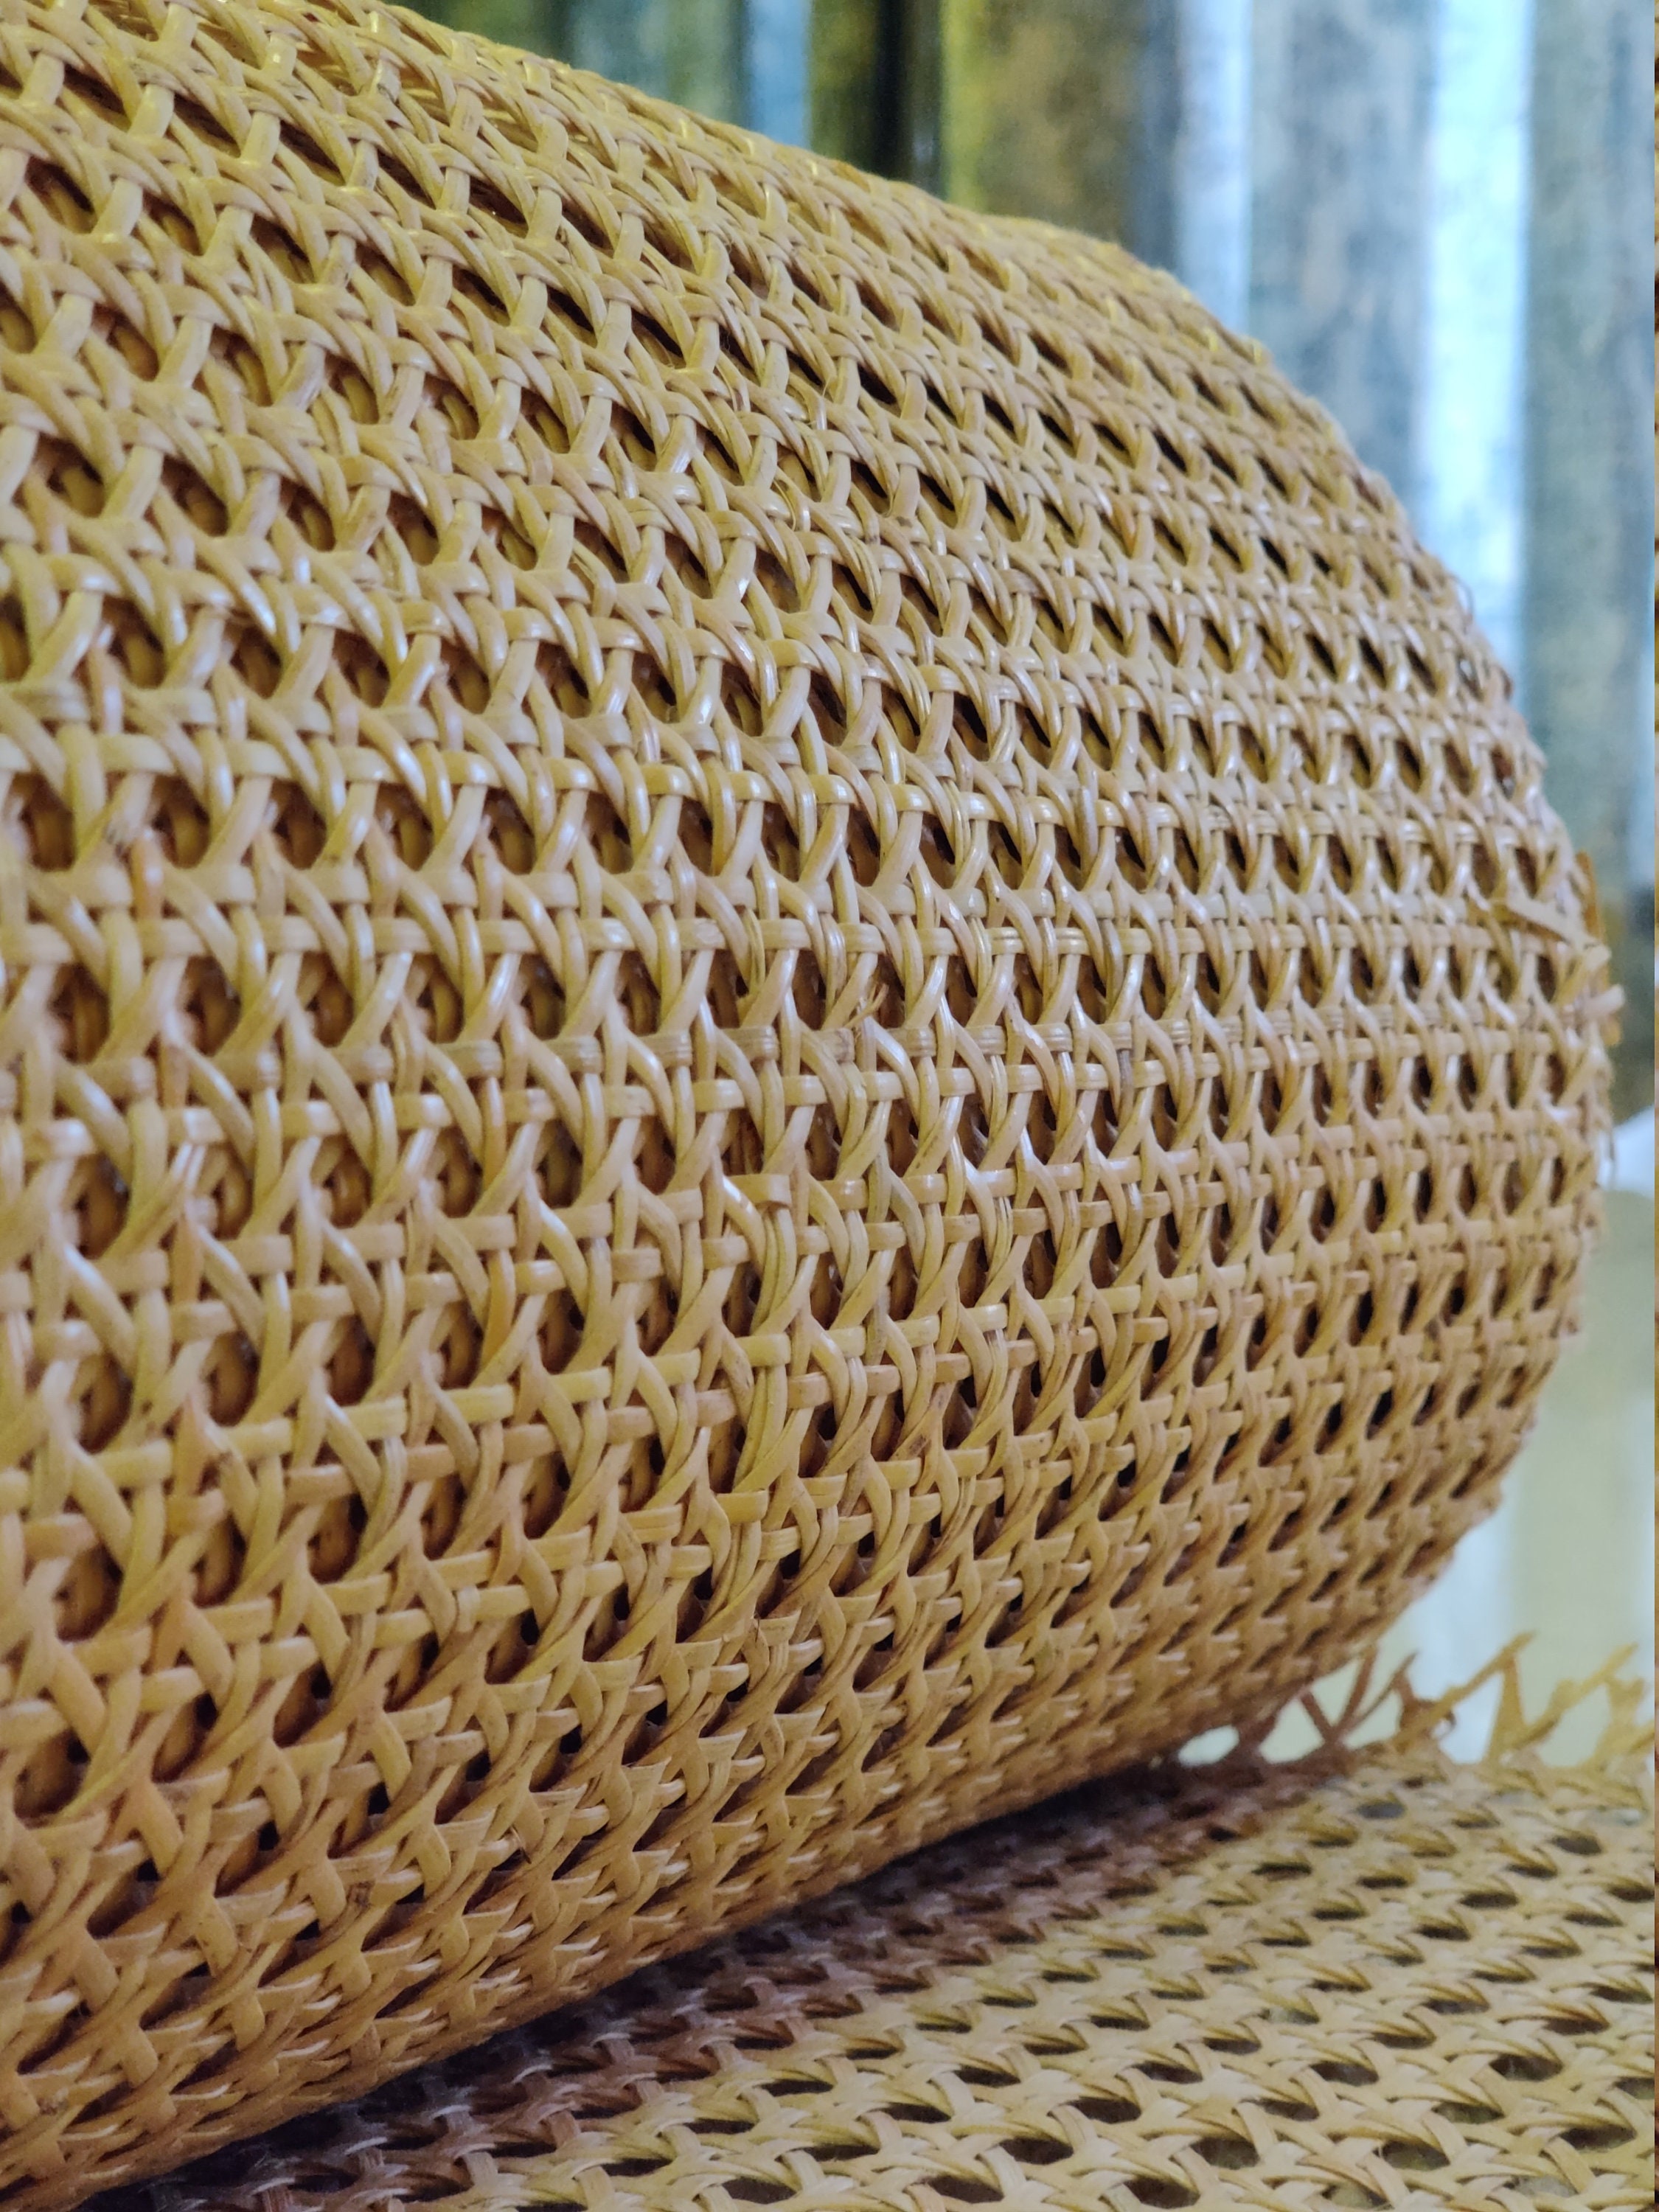 Cane Webbing 24'' Width Dark Natural Hexagon Rattan Cane Mesh Webbing Roll/caning  Material for Cane Furniture, 